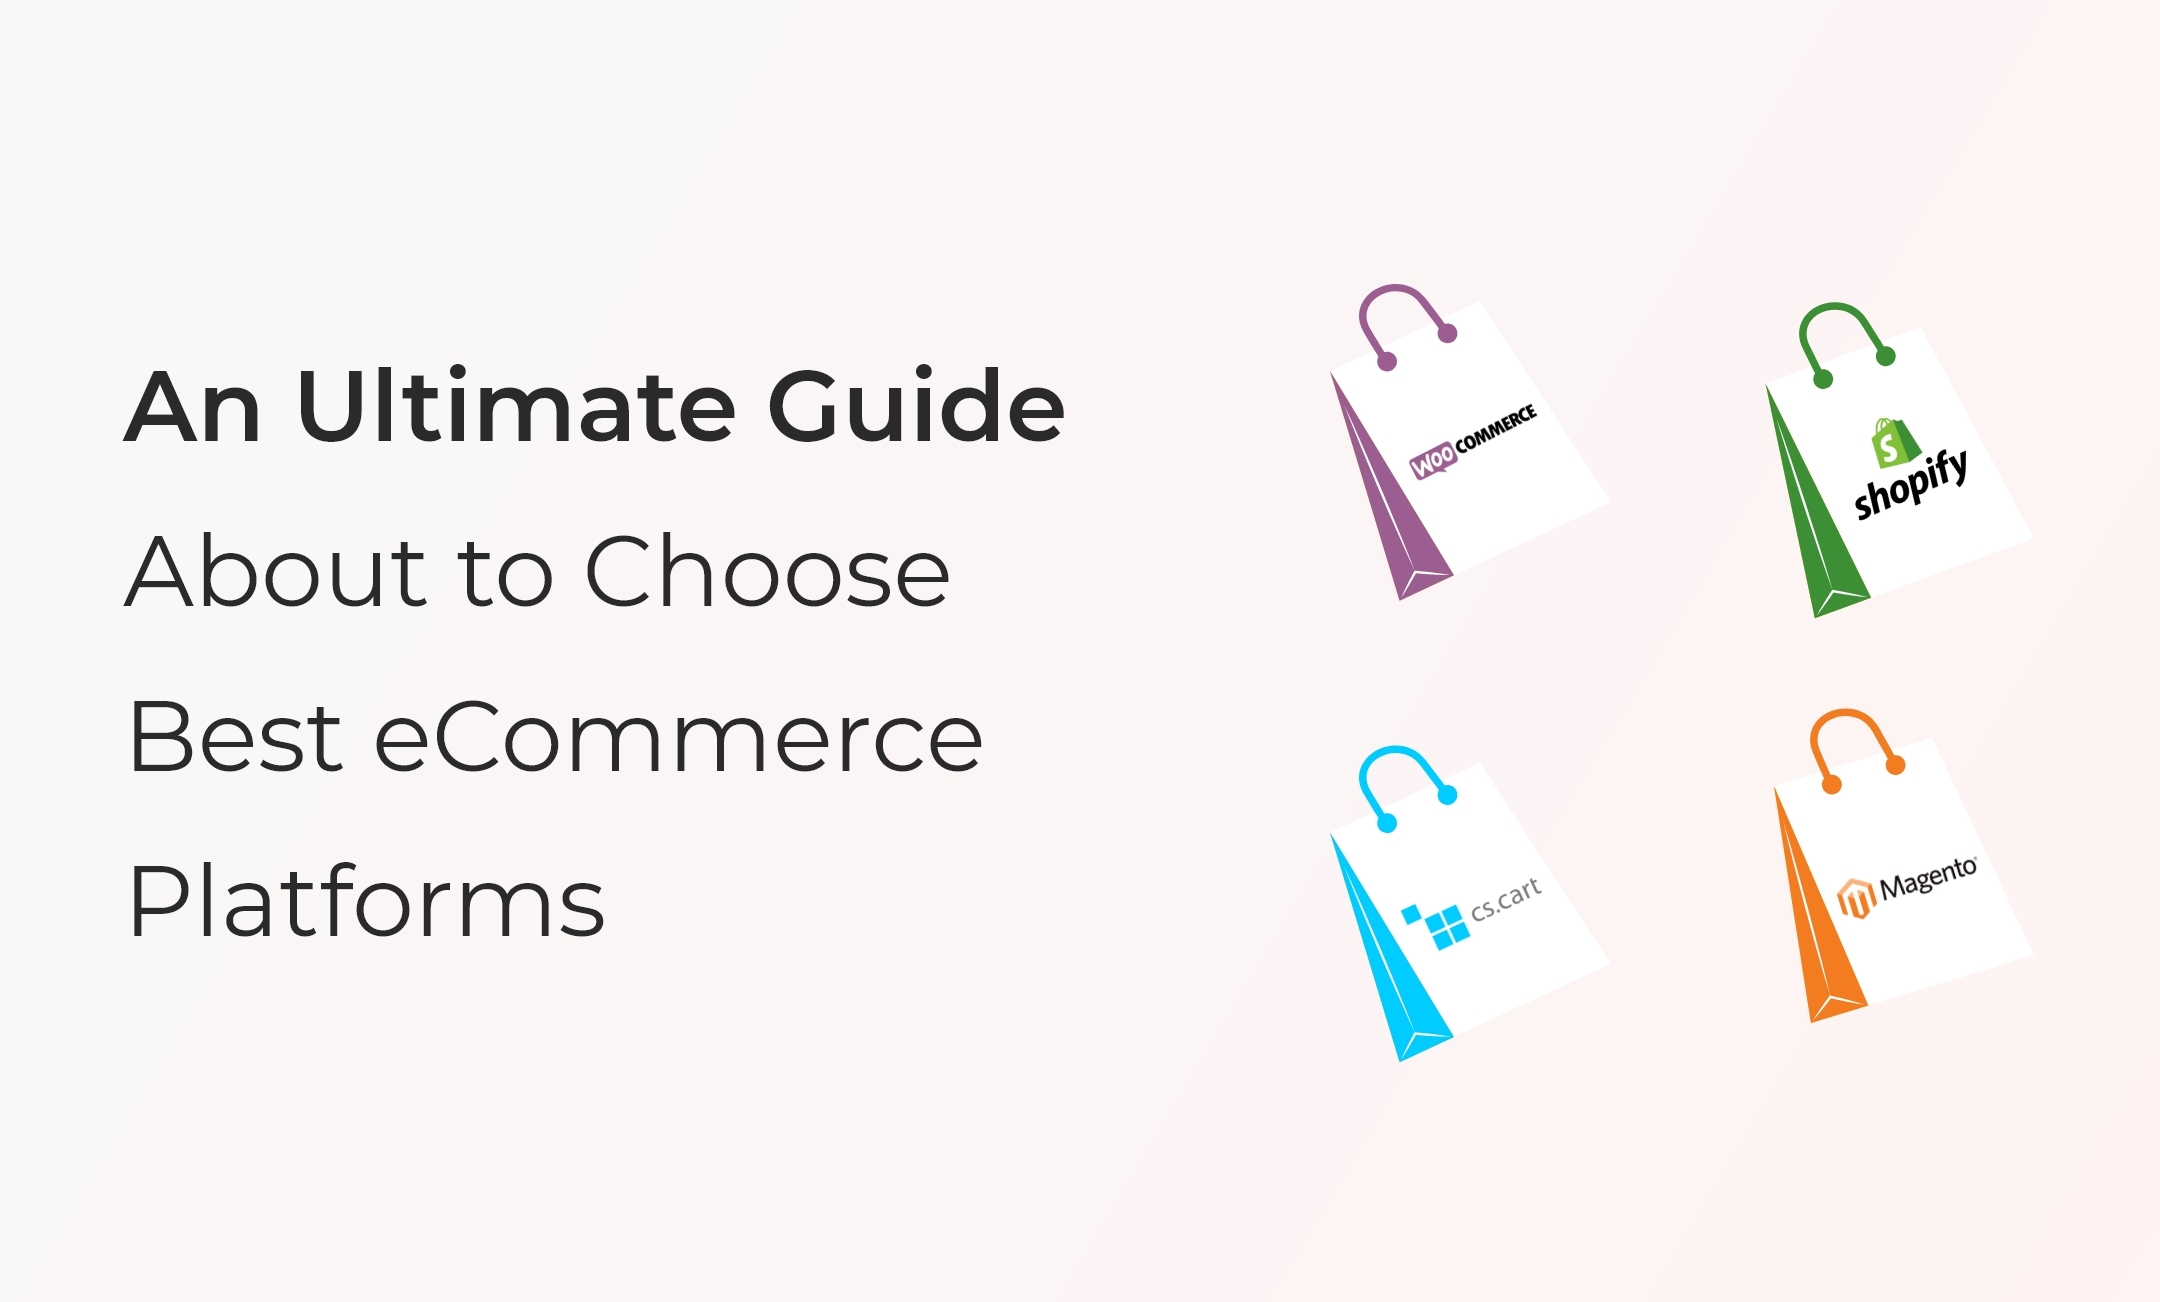 An Ultimate Guide to Choose Best eCommerce Platform